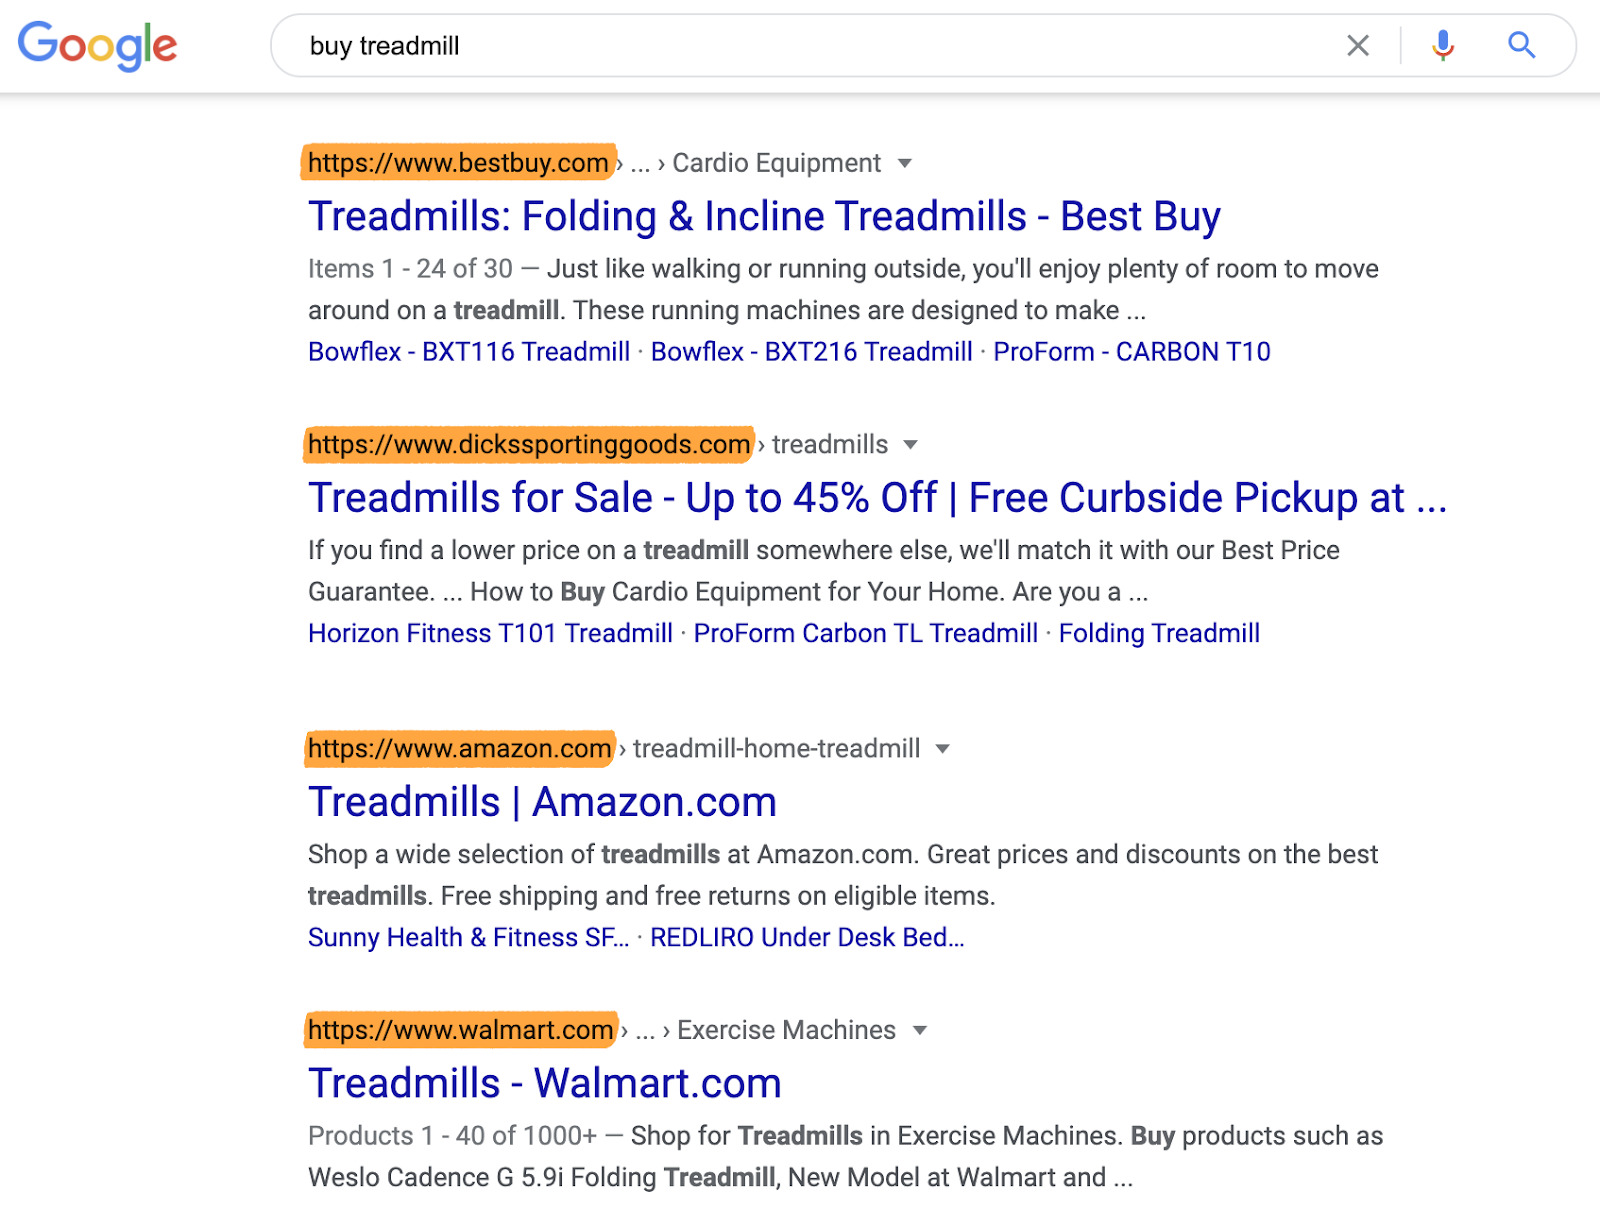 Google search to find out transactional keywords